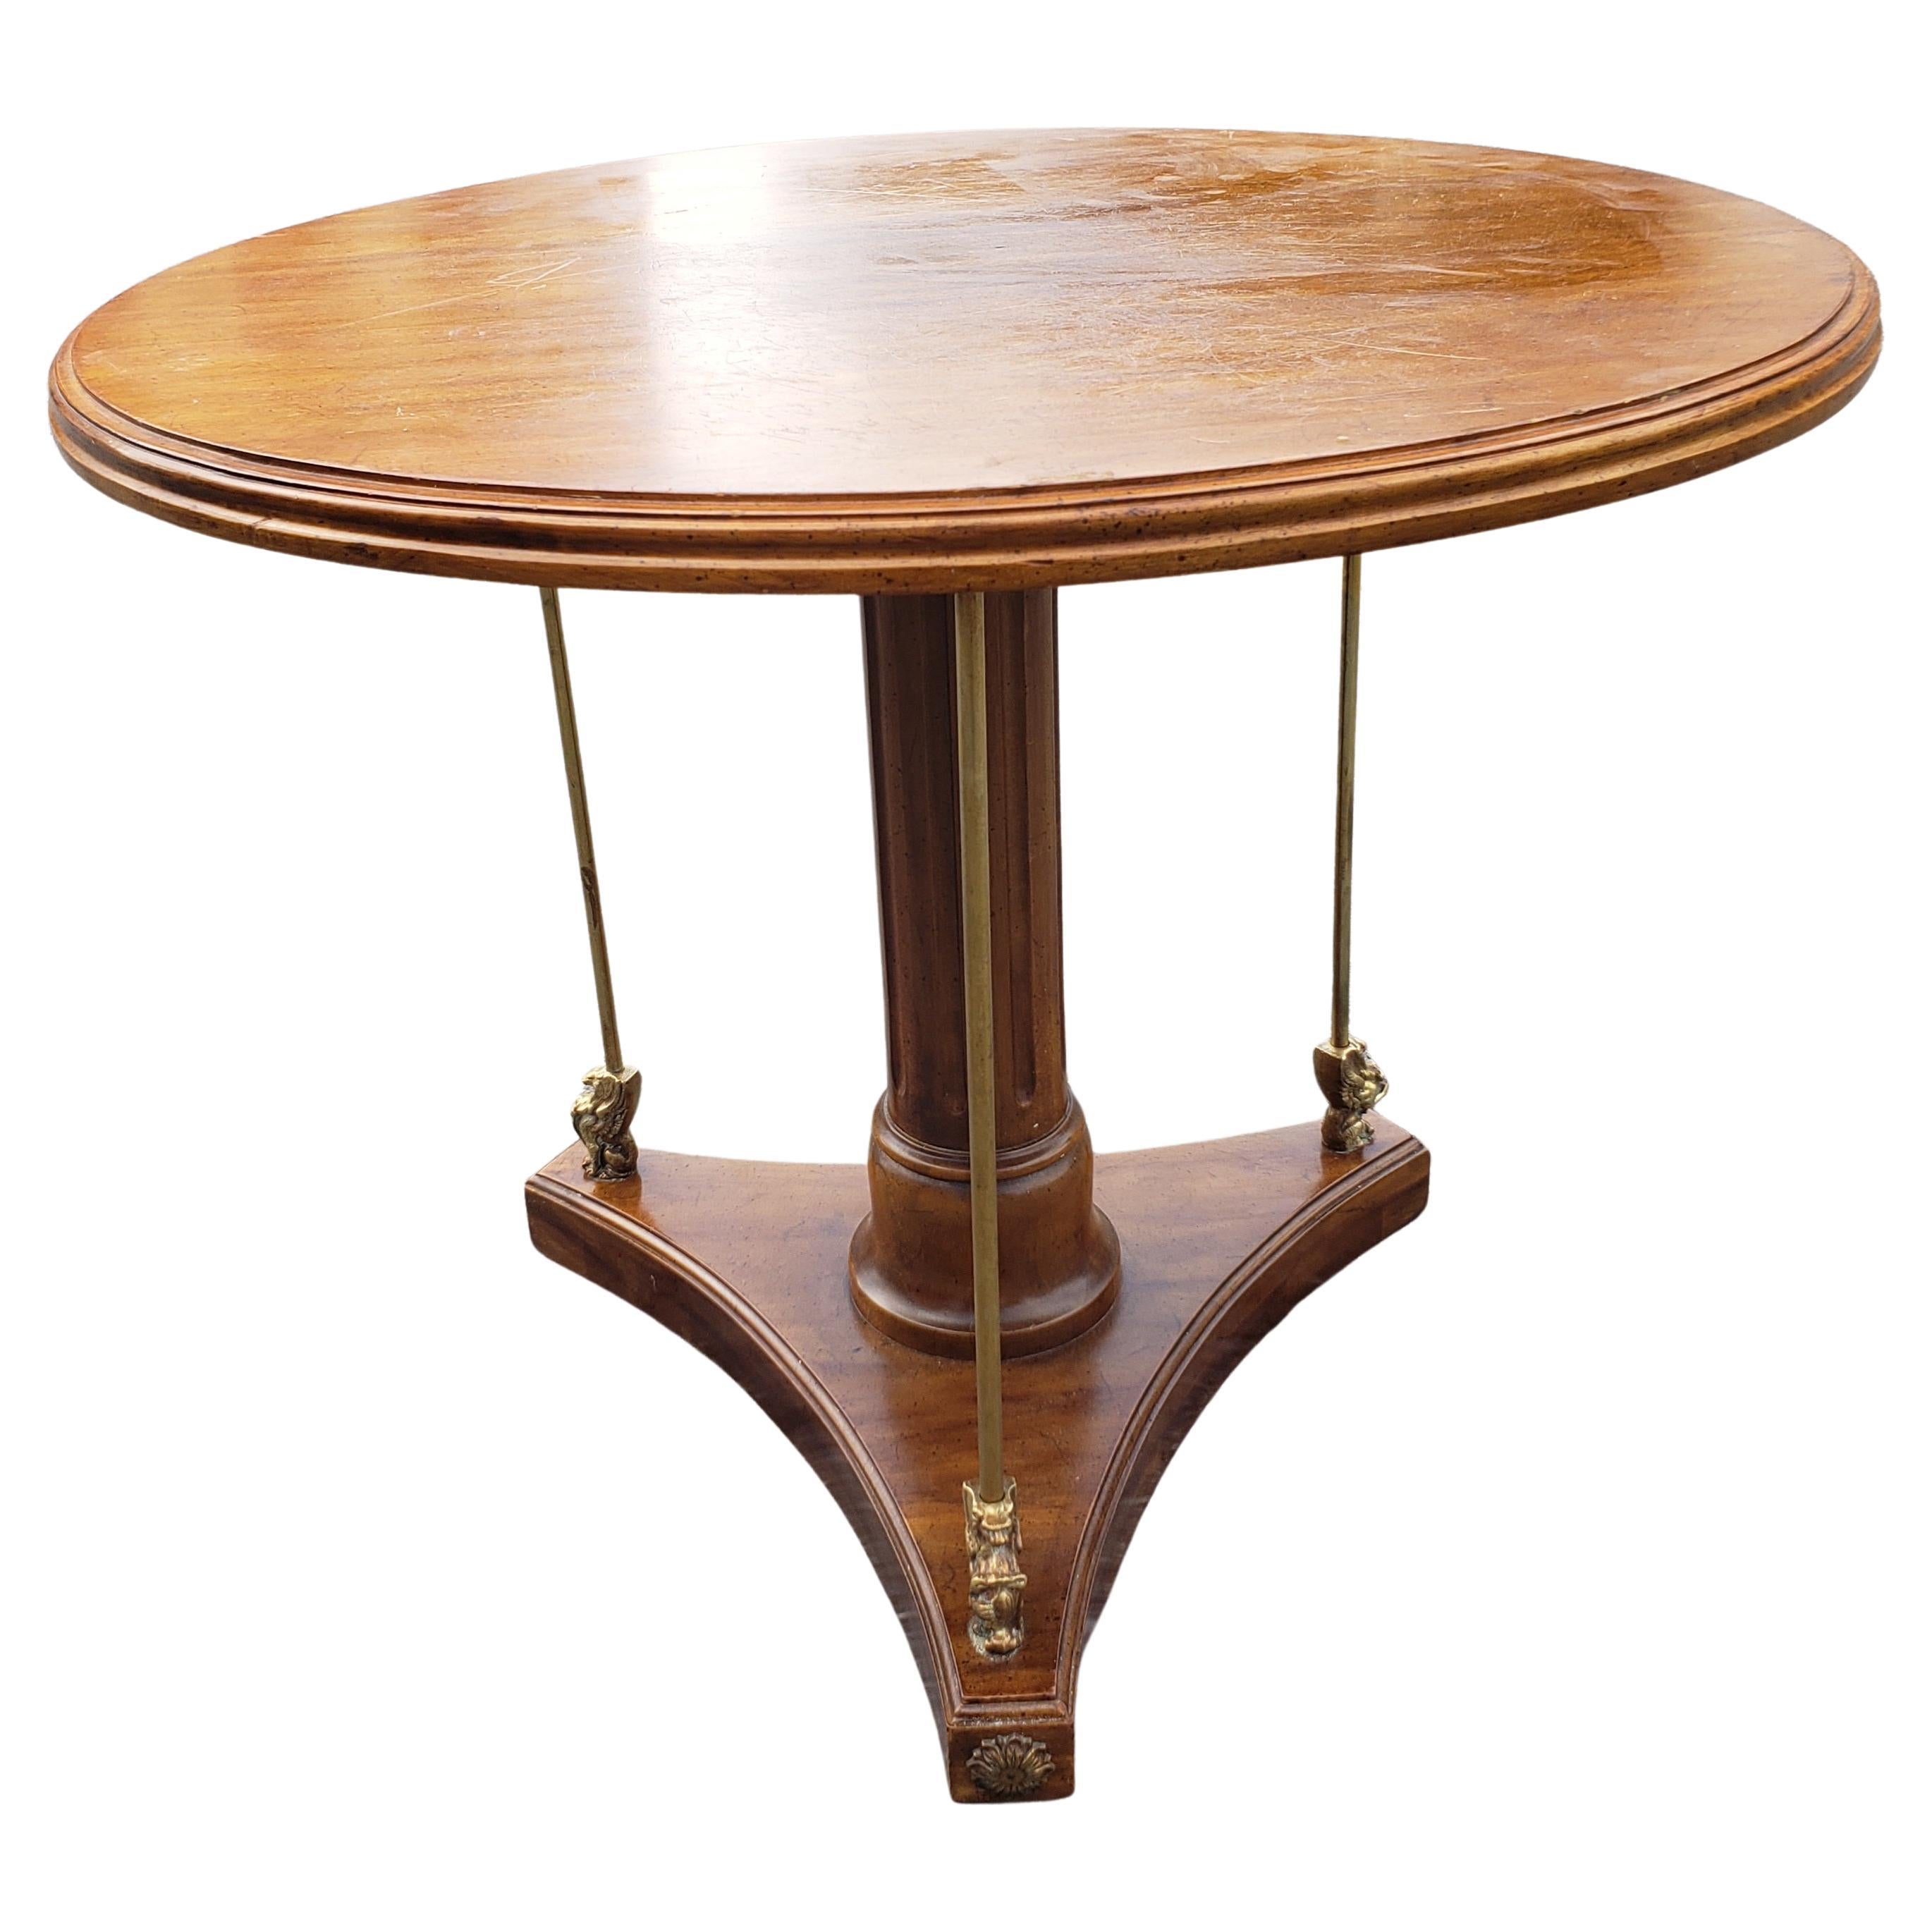 Metalwork Charles X Style Calais Cherry & Brass Gueridon Pedestal Table by Davis Cabinet For Sale